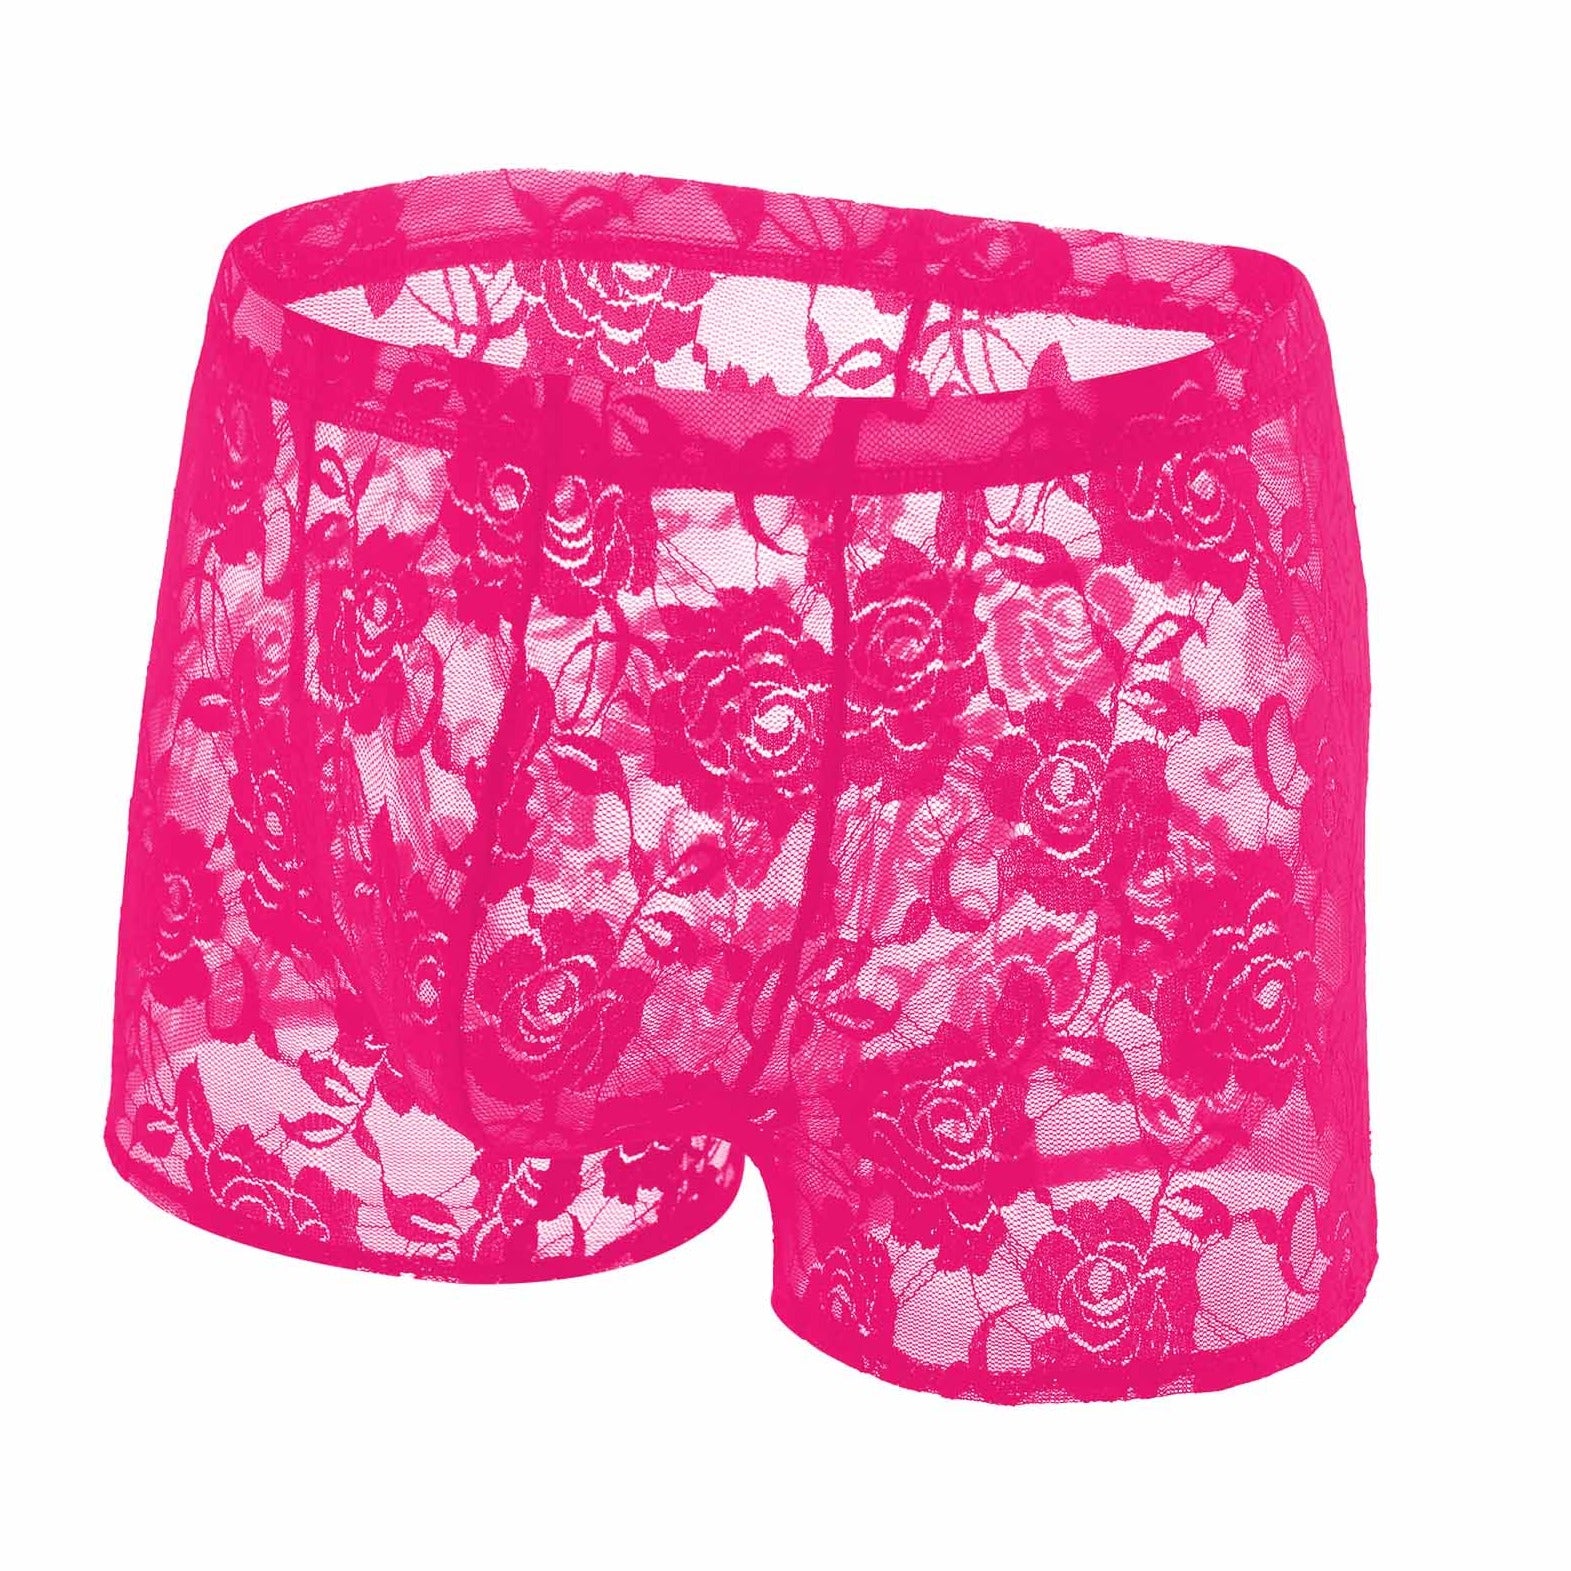 rose red Erotic Lace Boxers: Sexy Men's Lace Lingerie & Underwear - pridevoyageshop.com - gay men’s underwear and swimwear